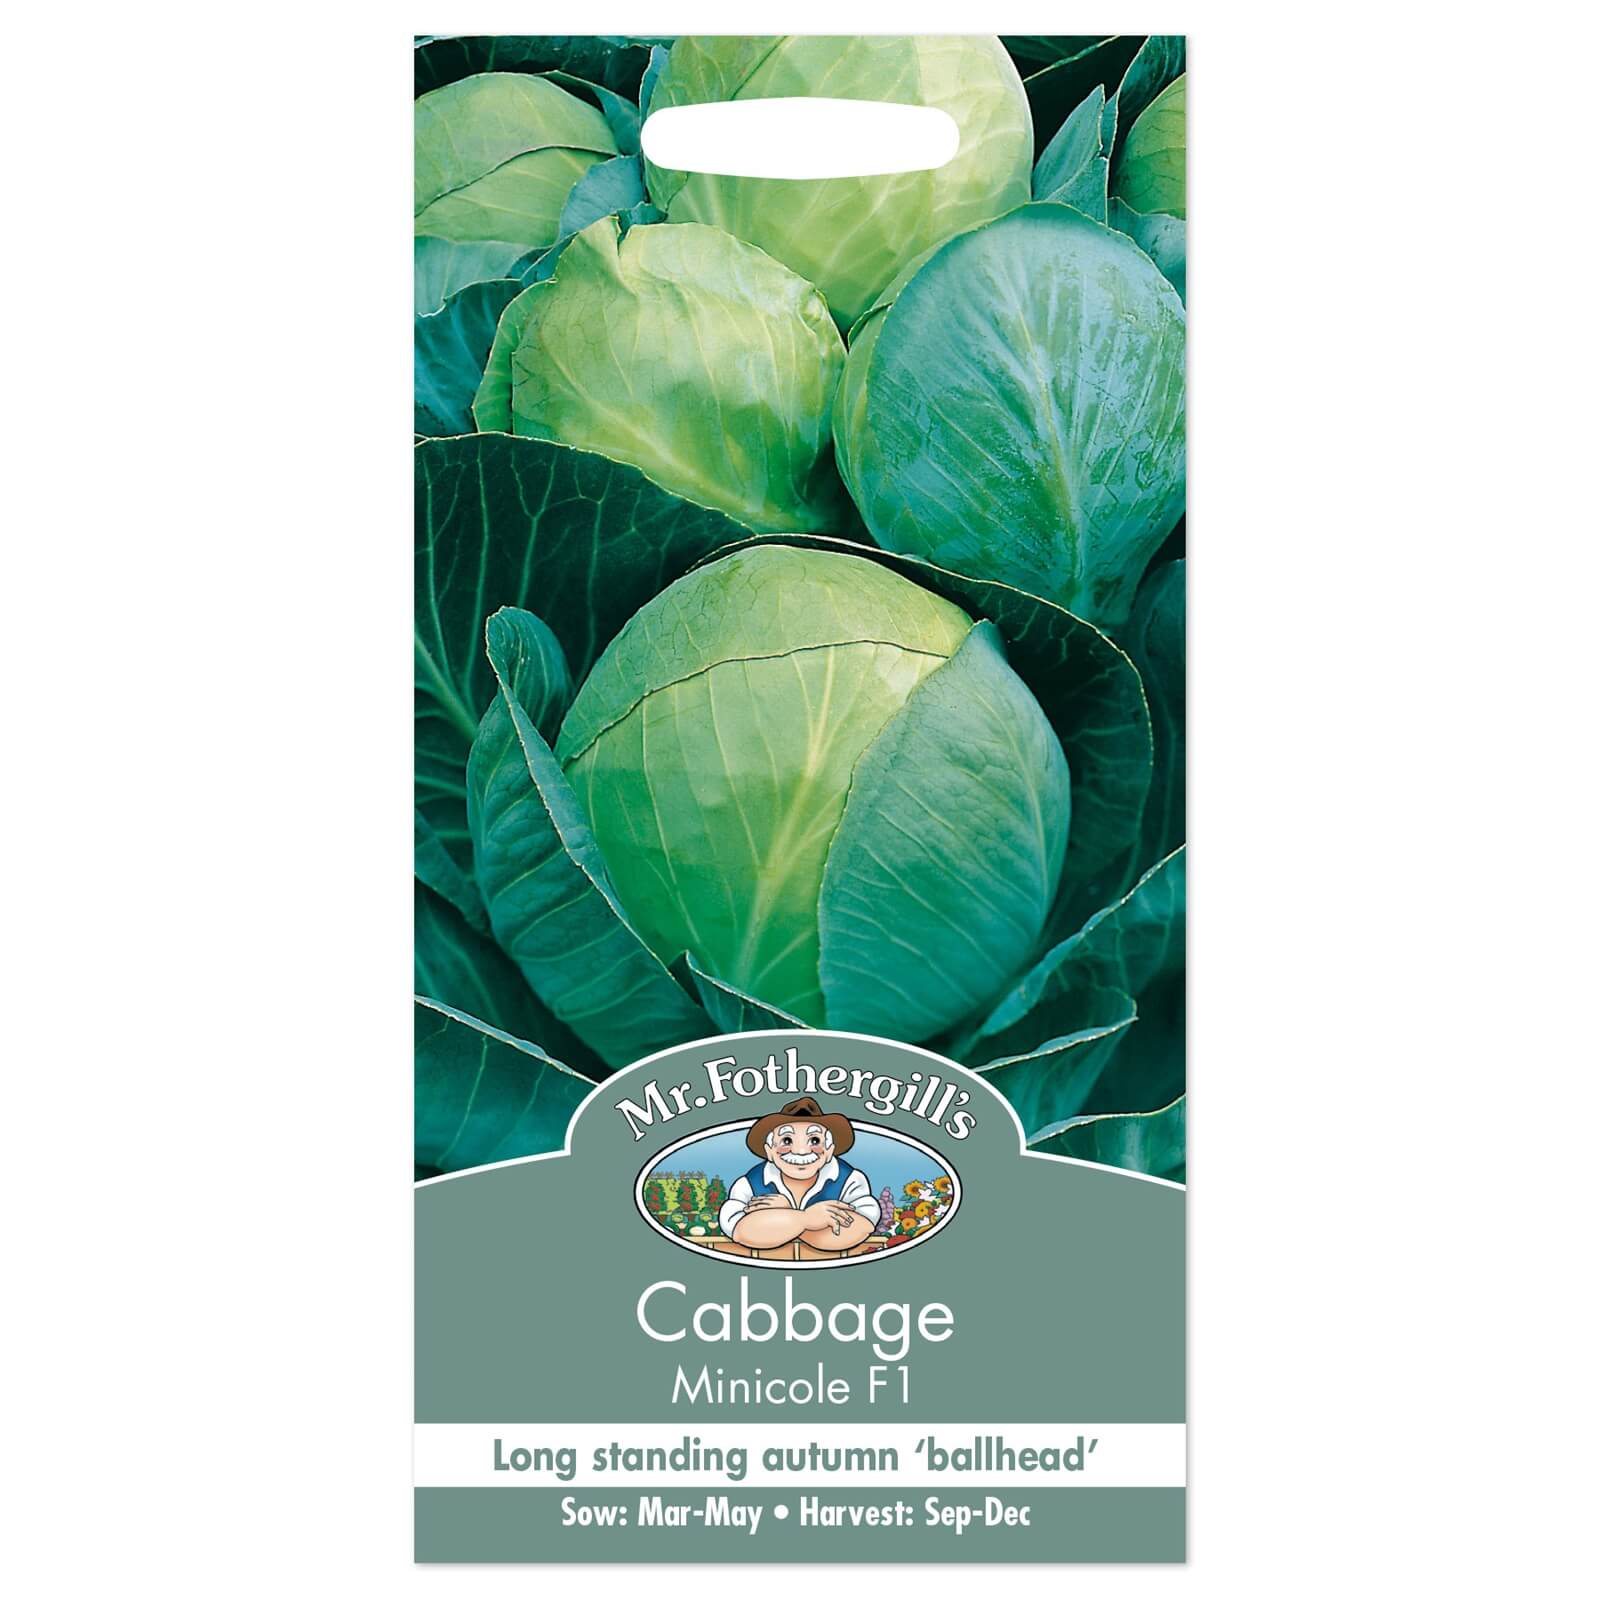 Mr. Fothergill's Cabbage Minicole F1 Seeds